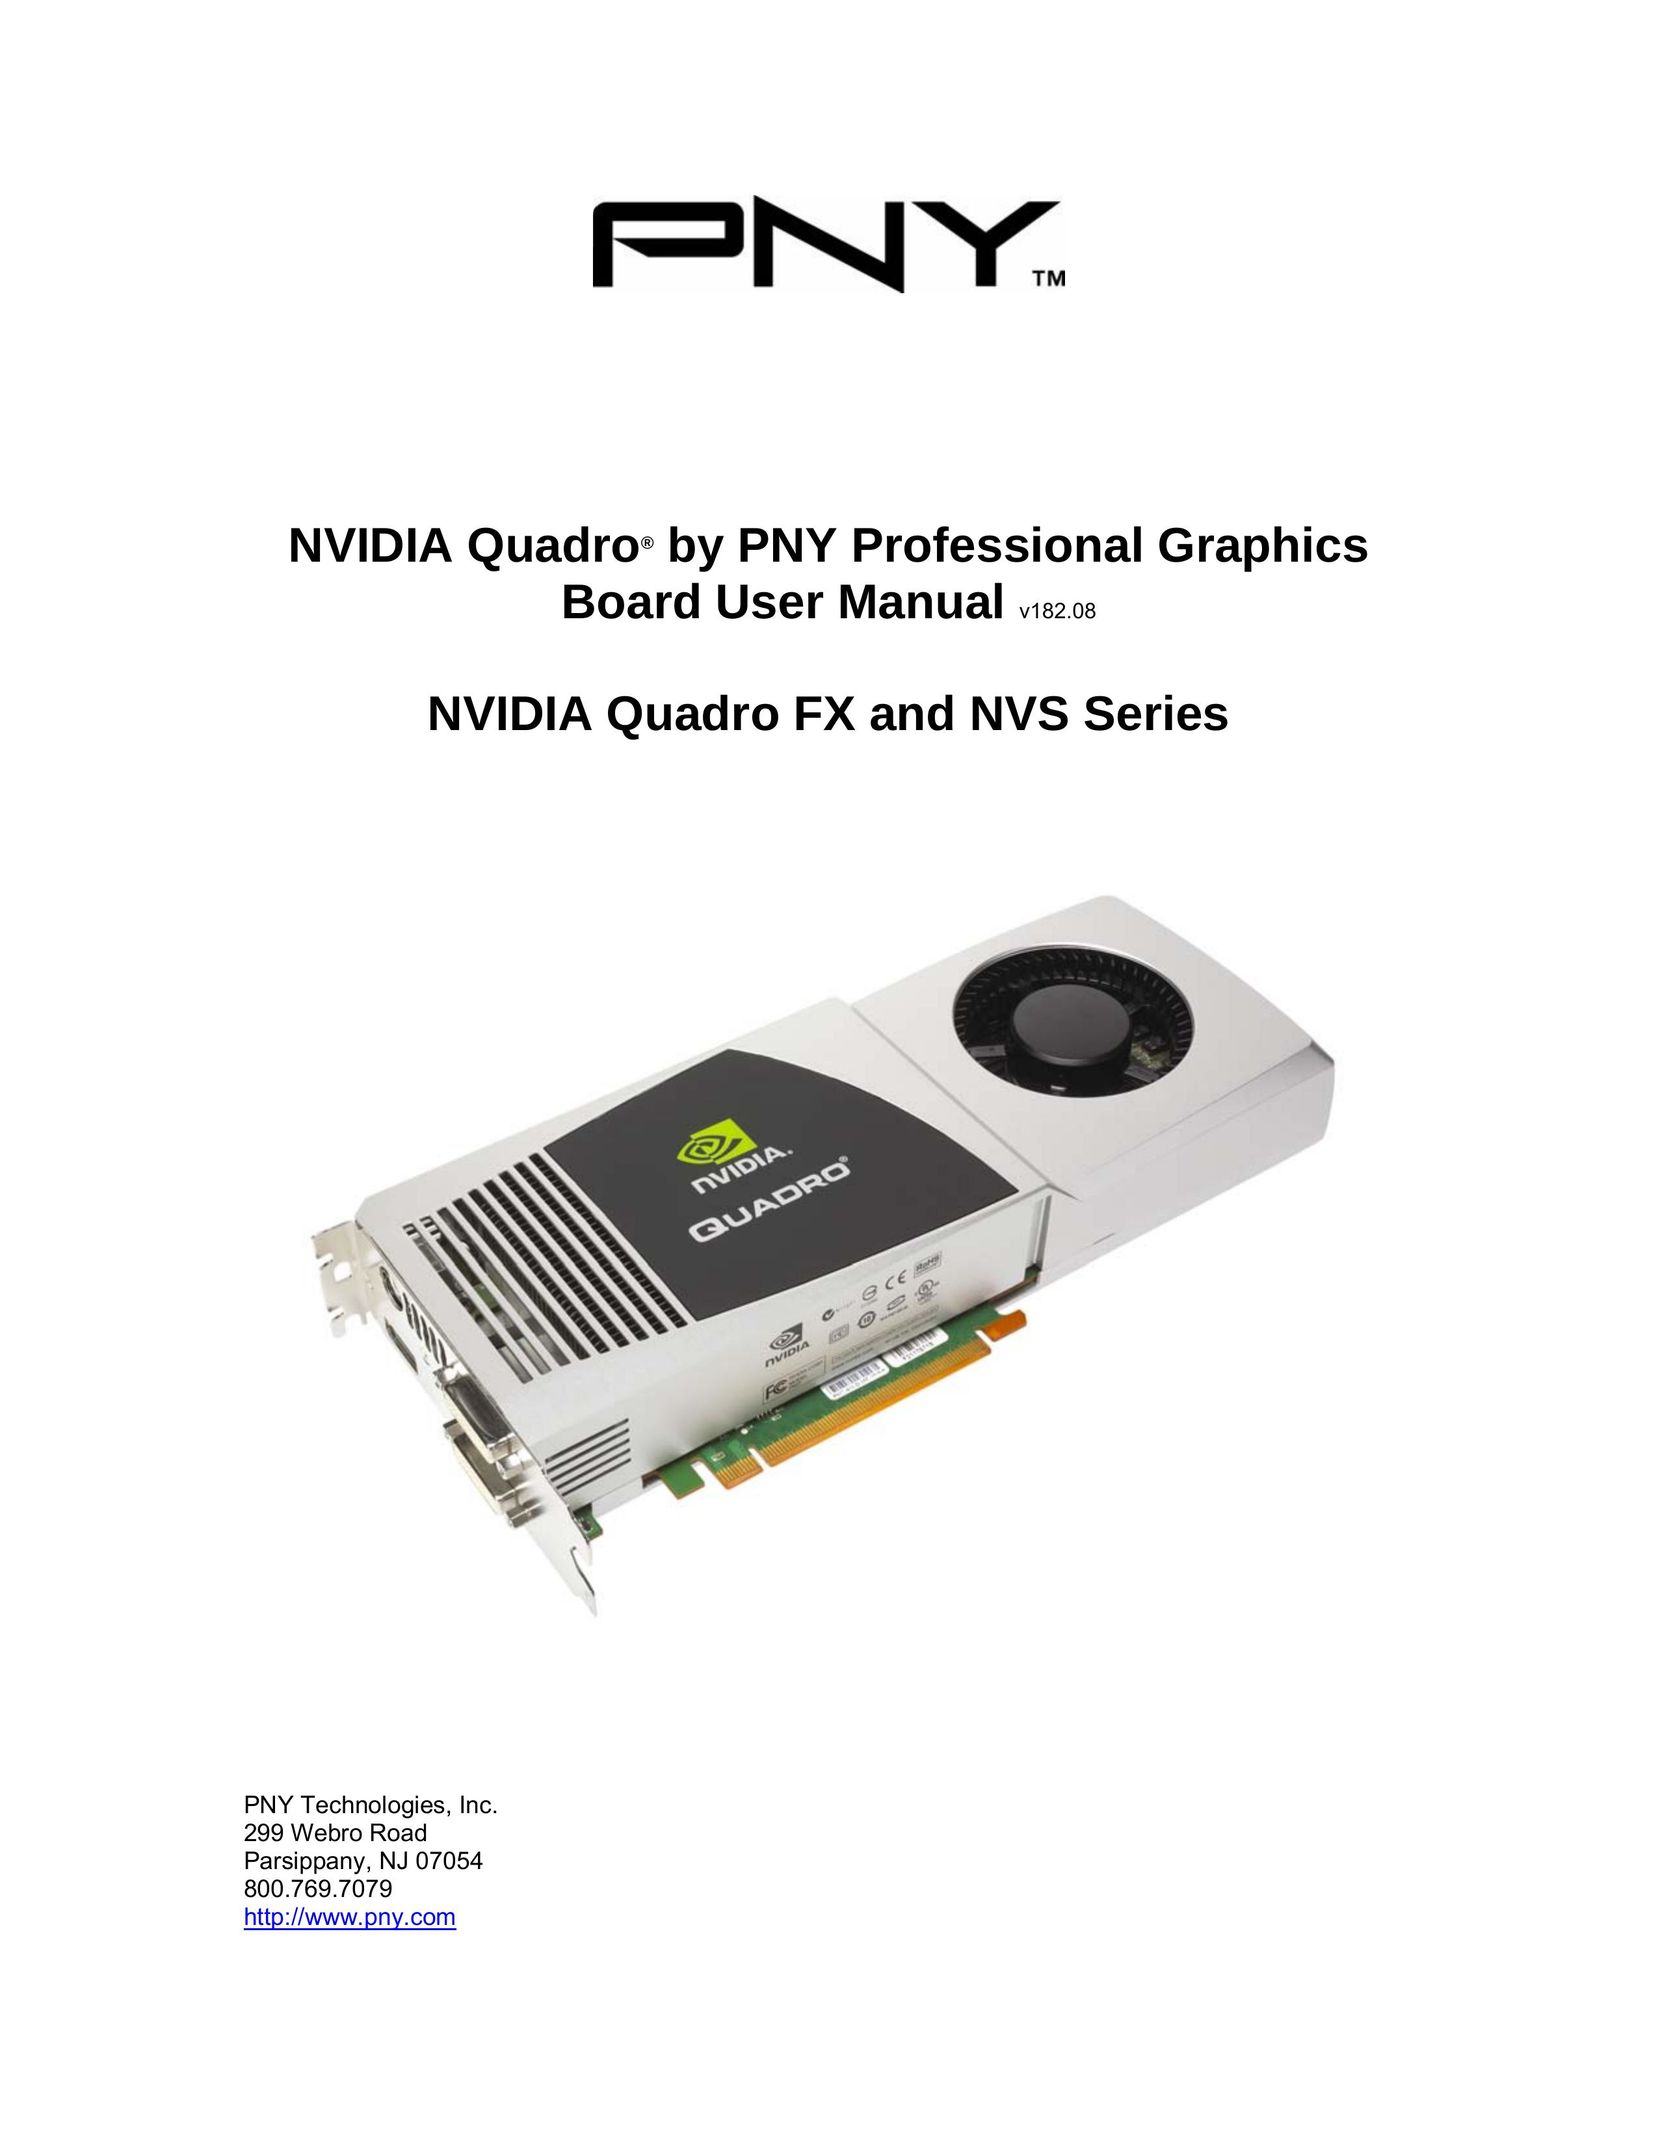 PNY FX 5600G Computer Hardware User Manual